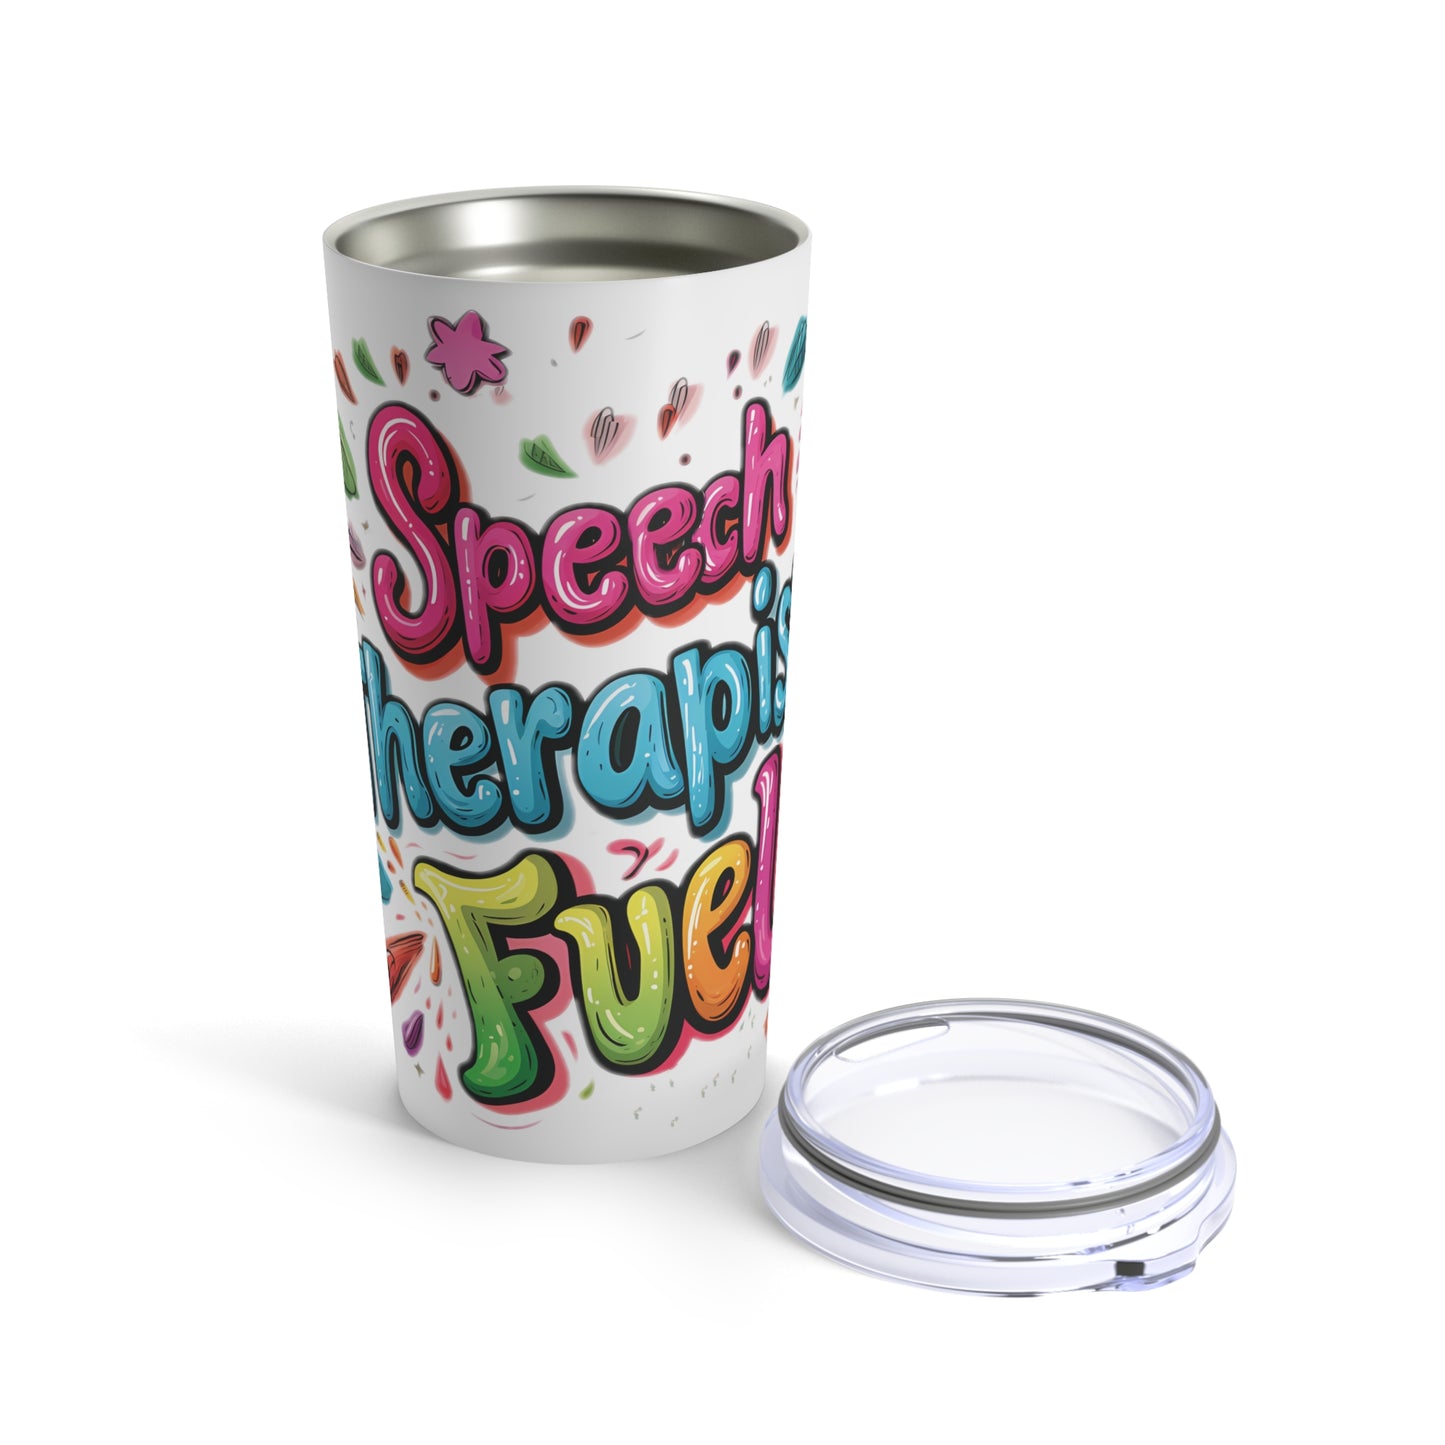 "Speech Therapist Fuel" 20oz Stainless Steel Tumbler - Vacuum-Insulated with Clear Lid